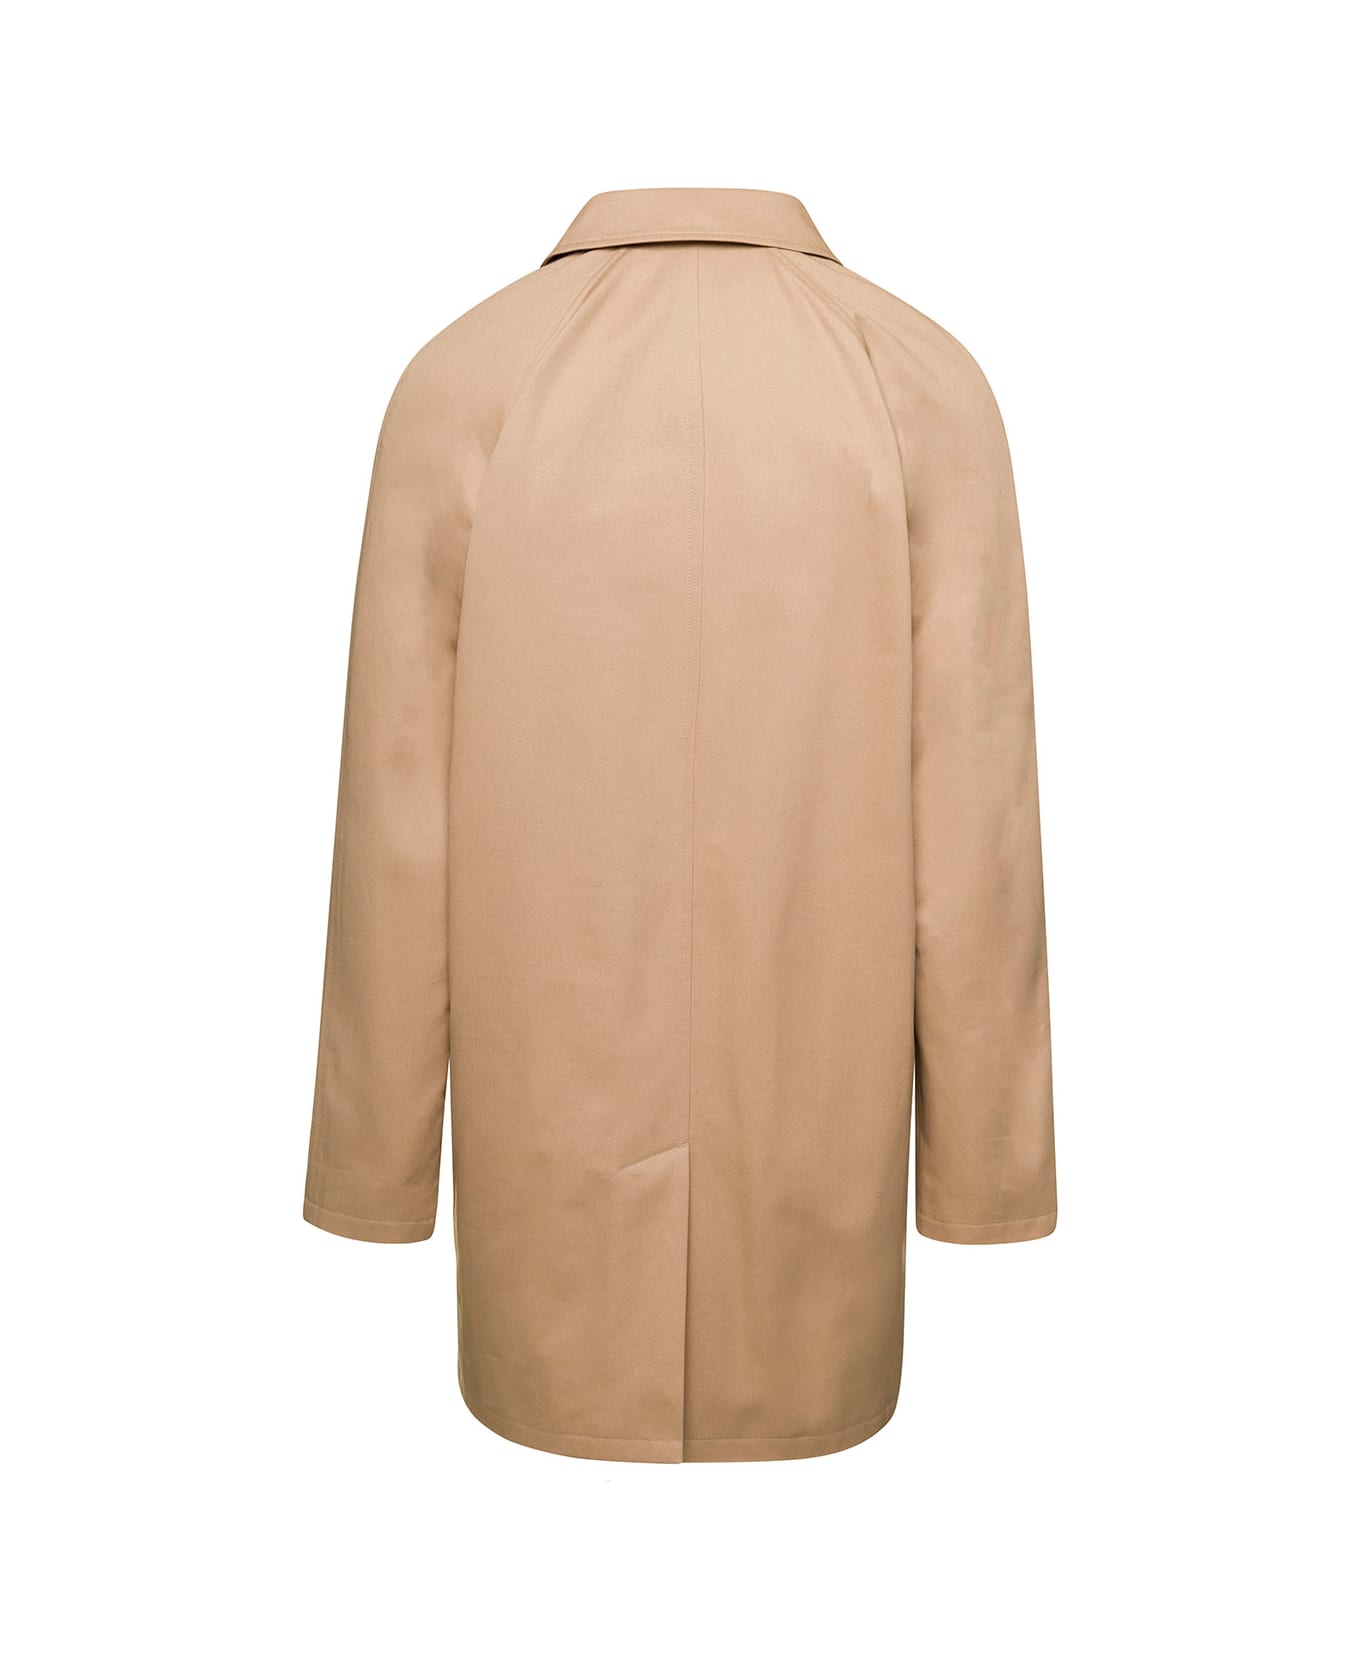 A.P.C. Beige Coat With Concealed Fastening In Cotton Man - Beige